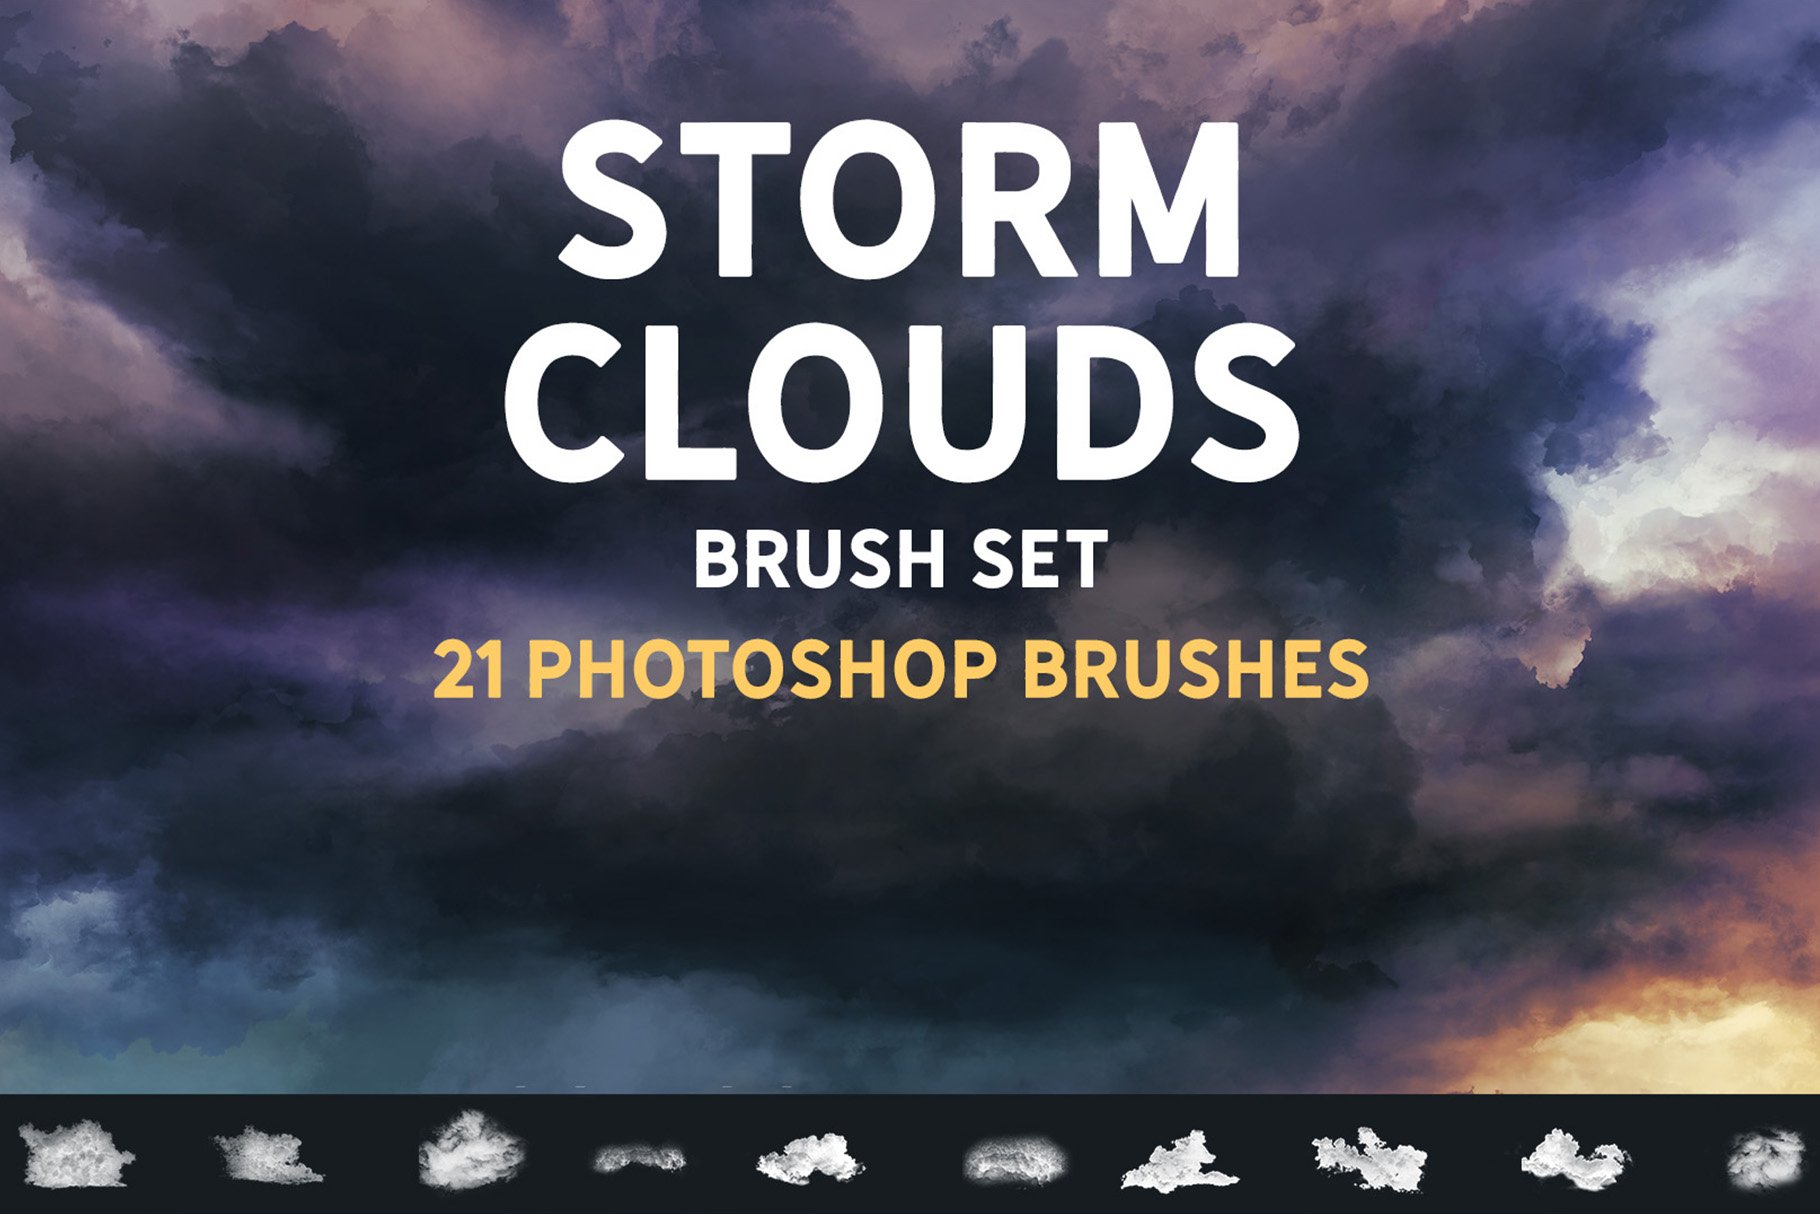 Storm clouds brush setcover image.